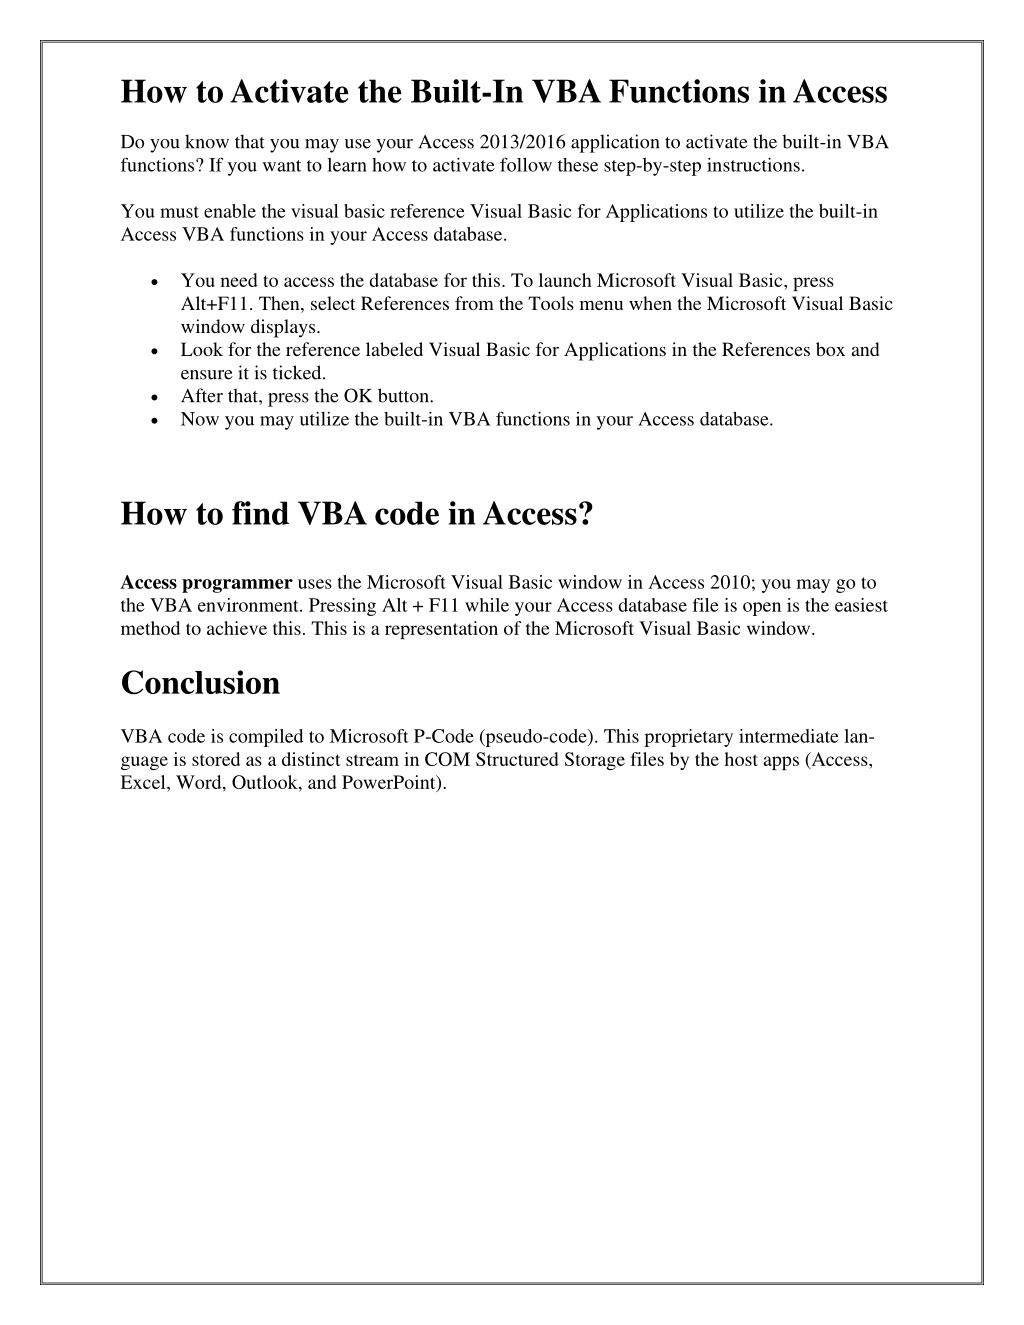 ppt-things-to-know-about-access-vba-powerpoint-presentation-free-download-id-11185096